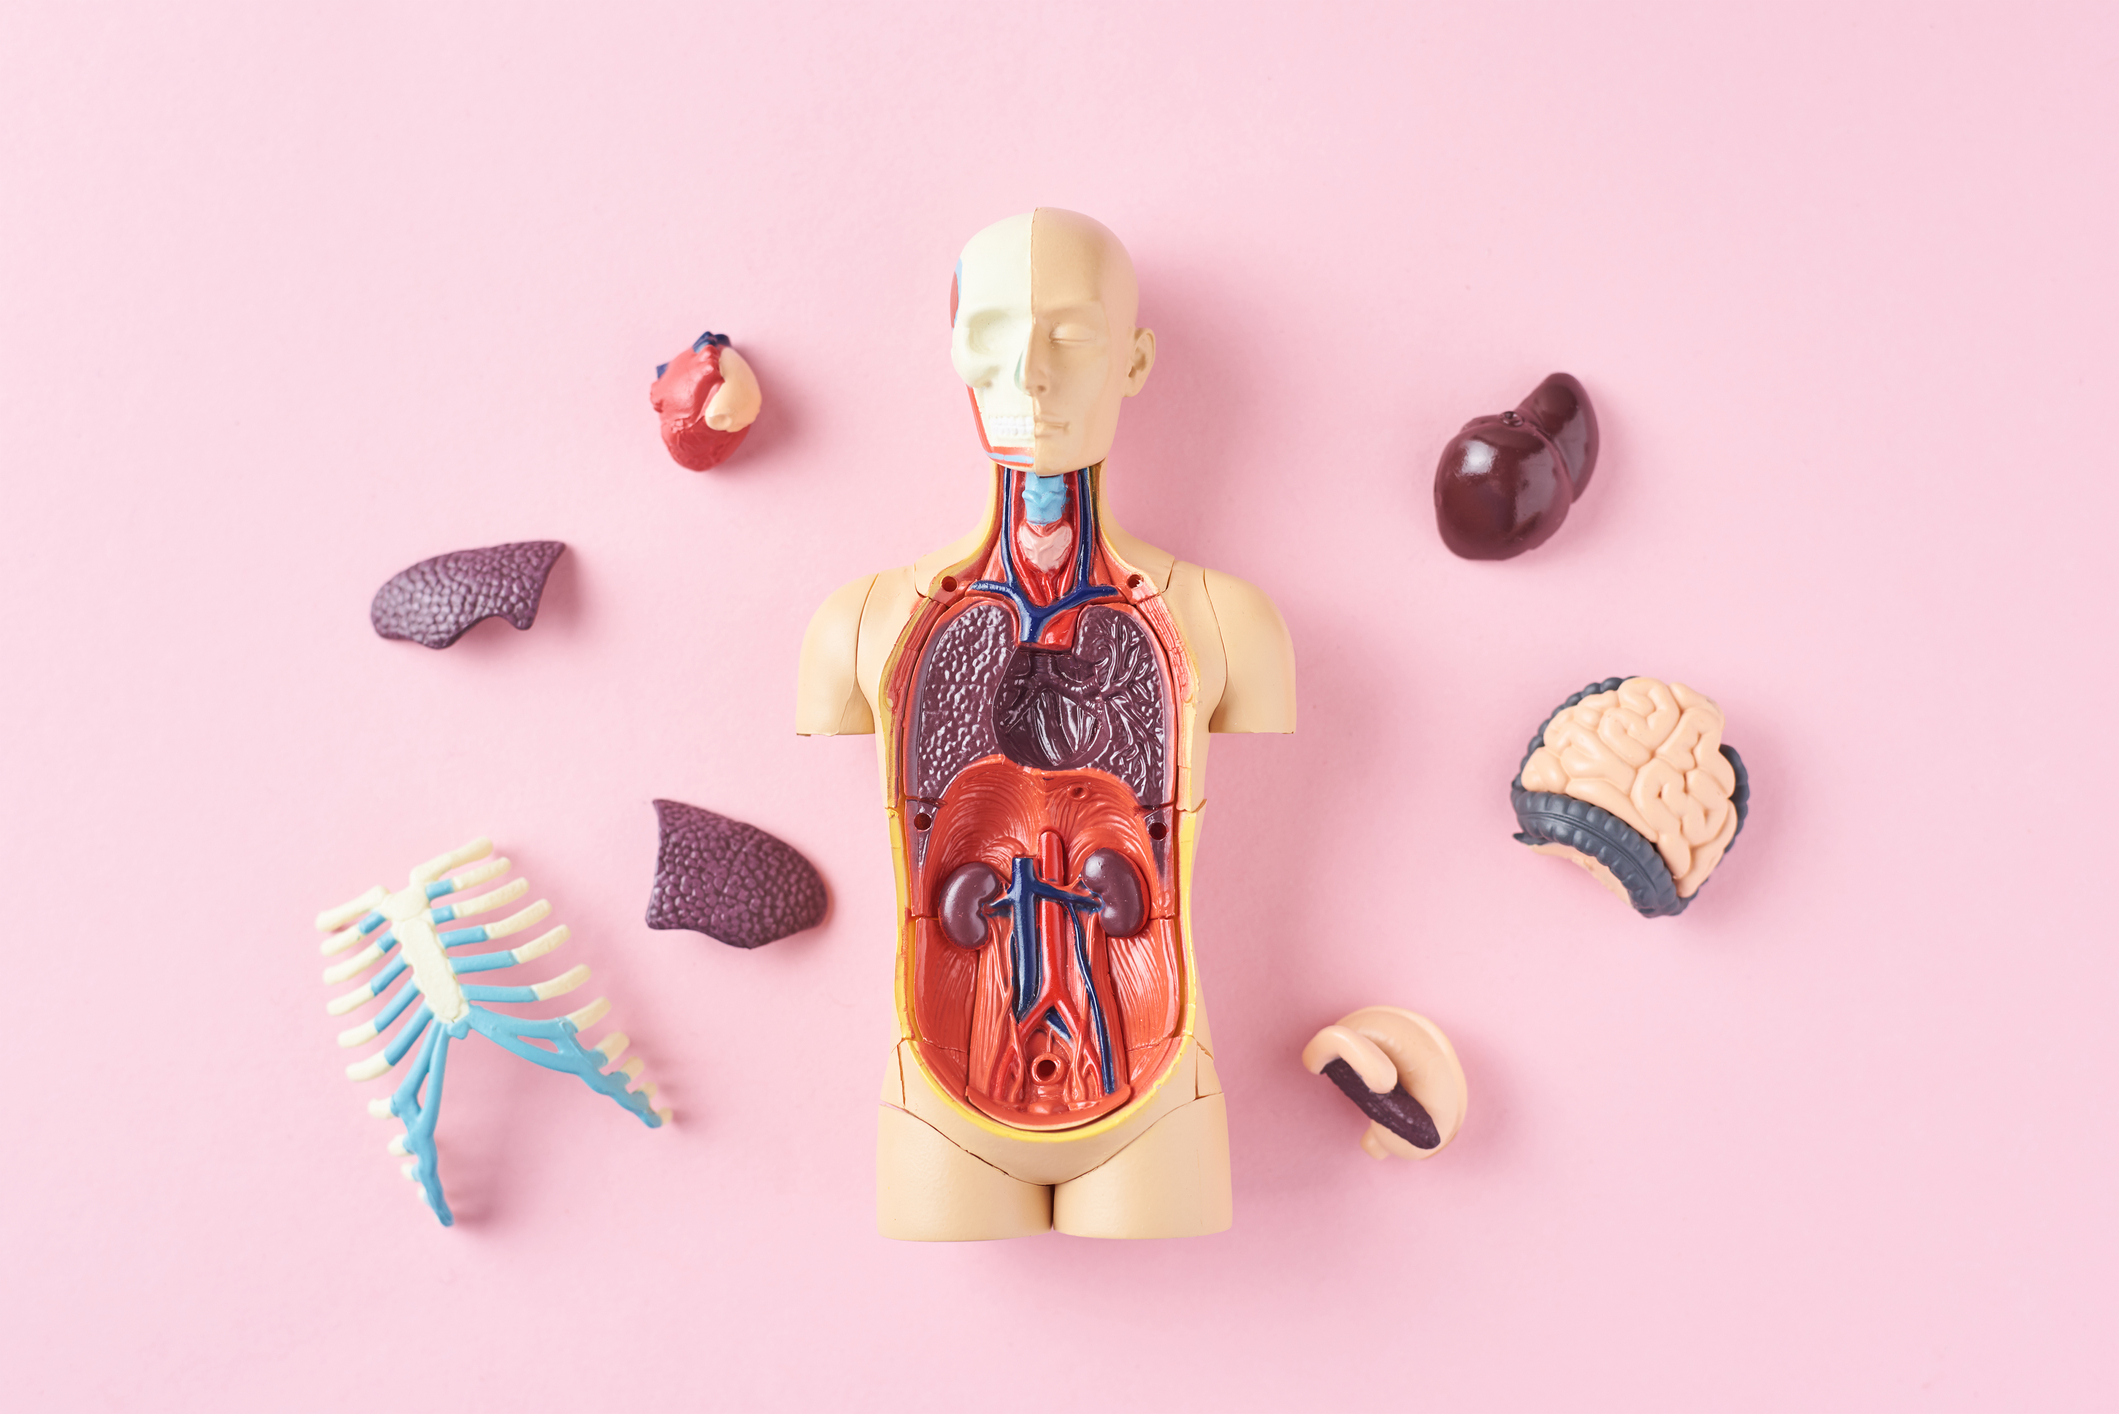 A medical model with detachable organs laid out on a pink background